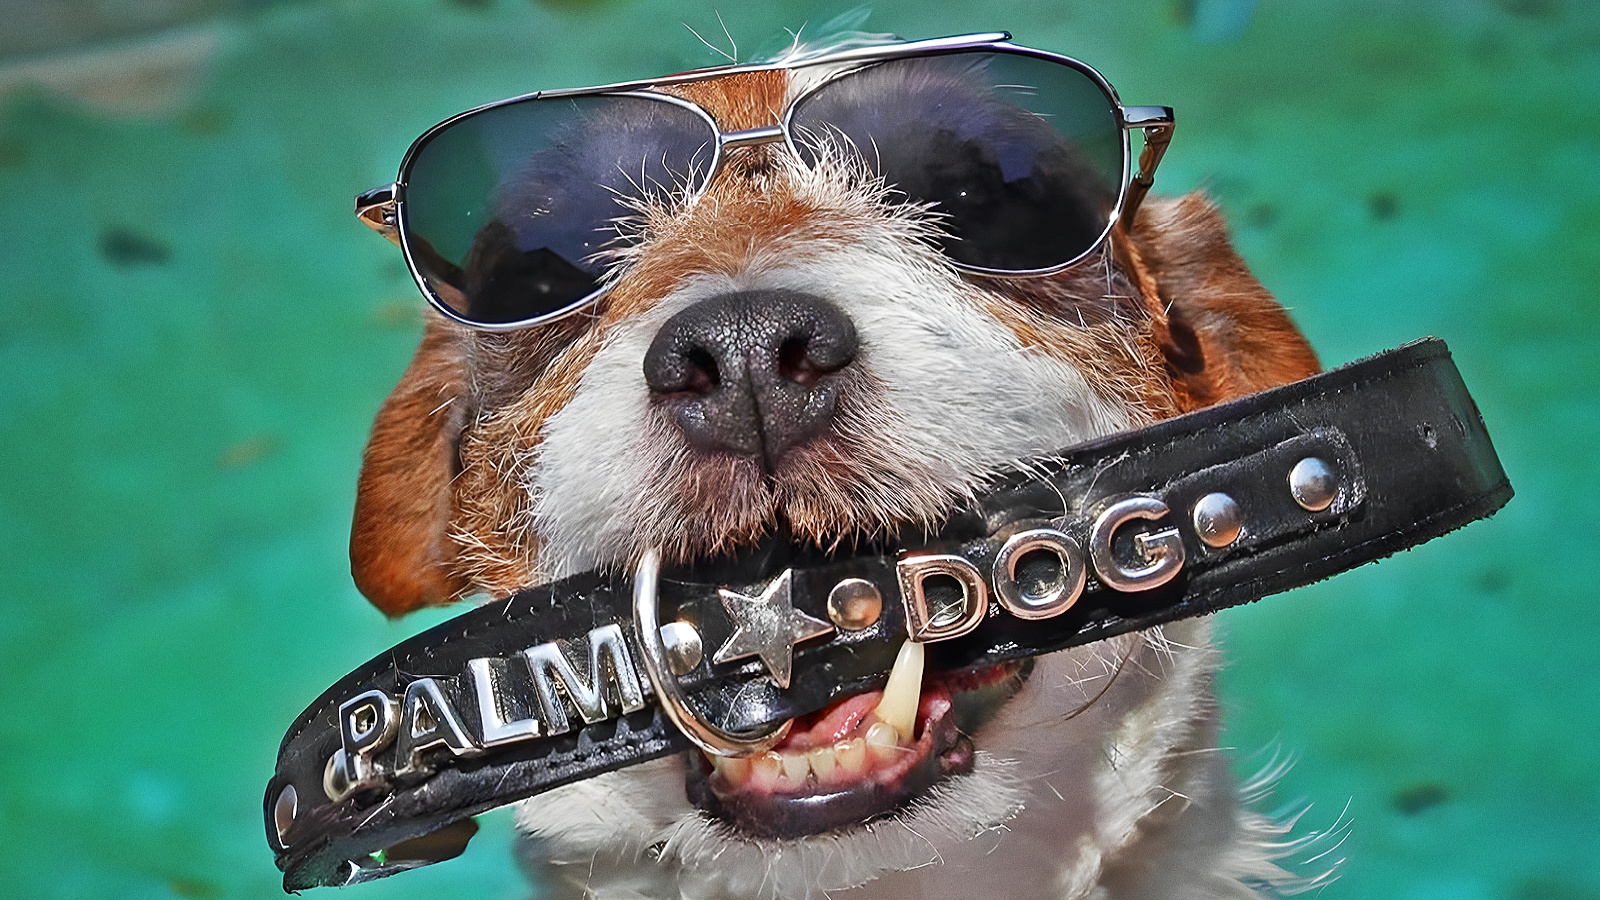 Cannes 2023, day 10: the most awaited moment, the Palm Dog!